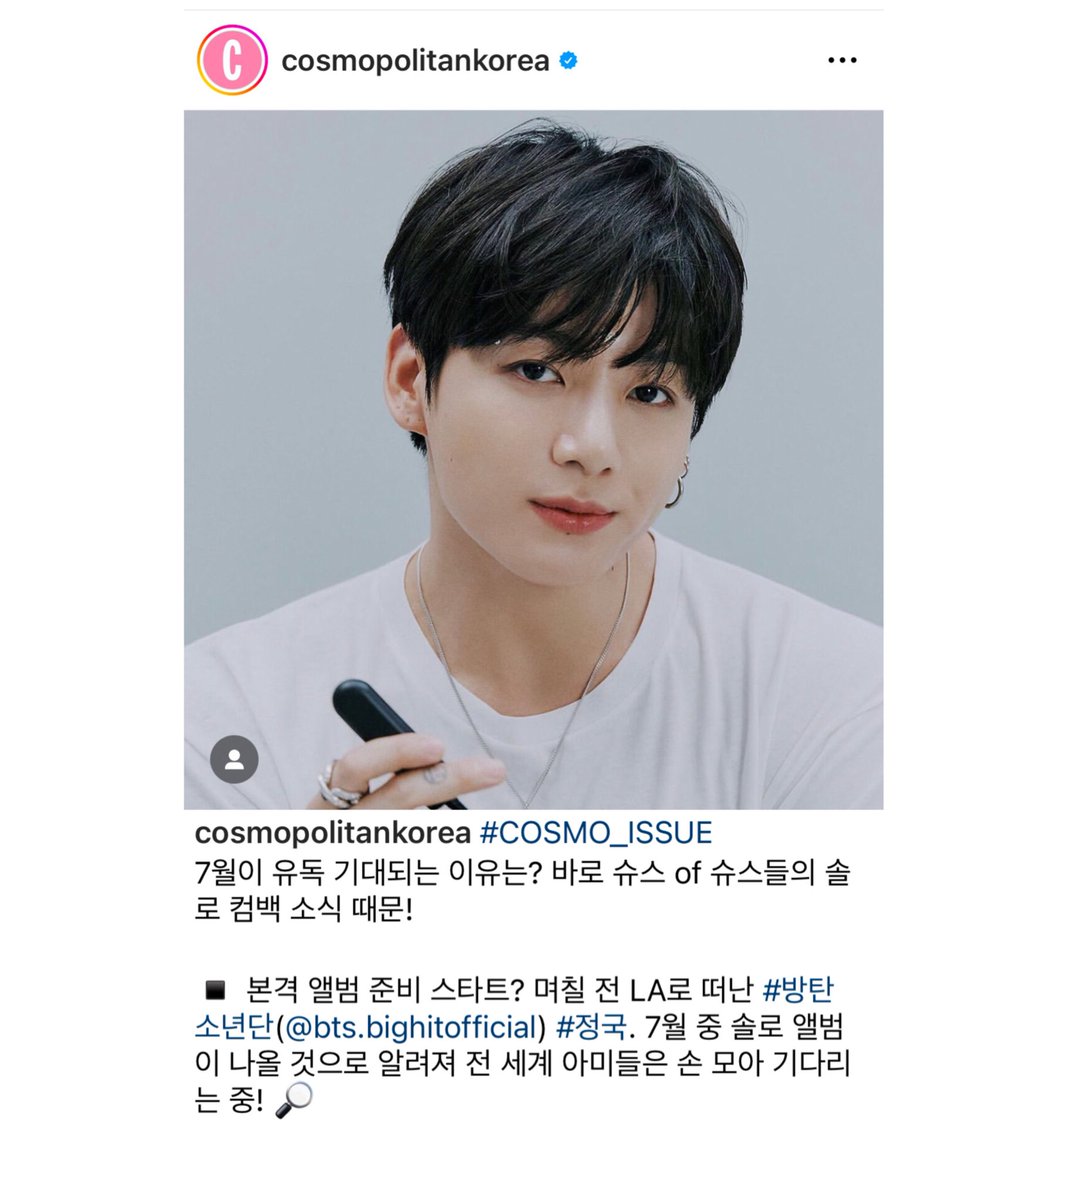 COSMOPOLITAN KOREA listed Jungkook’s Upcoming Debut Solo album first as one of superstar's solo comebacks to which why they are looking forward for July. 

“Why are you looking forward to July? This is the news of the ultra superstar's solo comeback.”

“Start preparing for the…